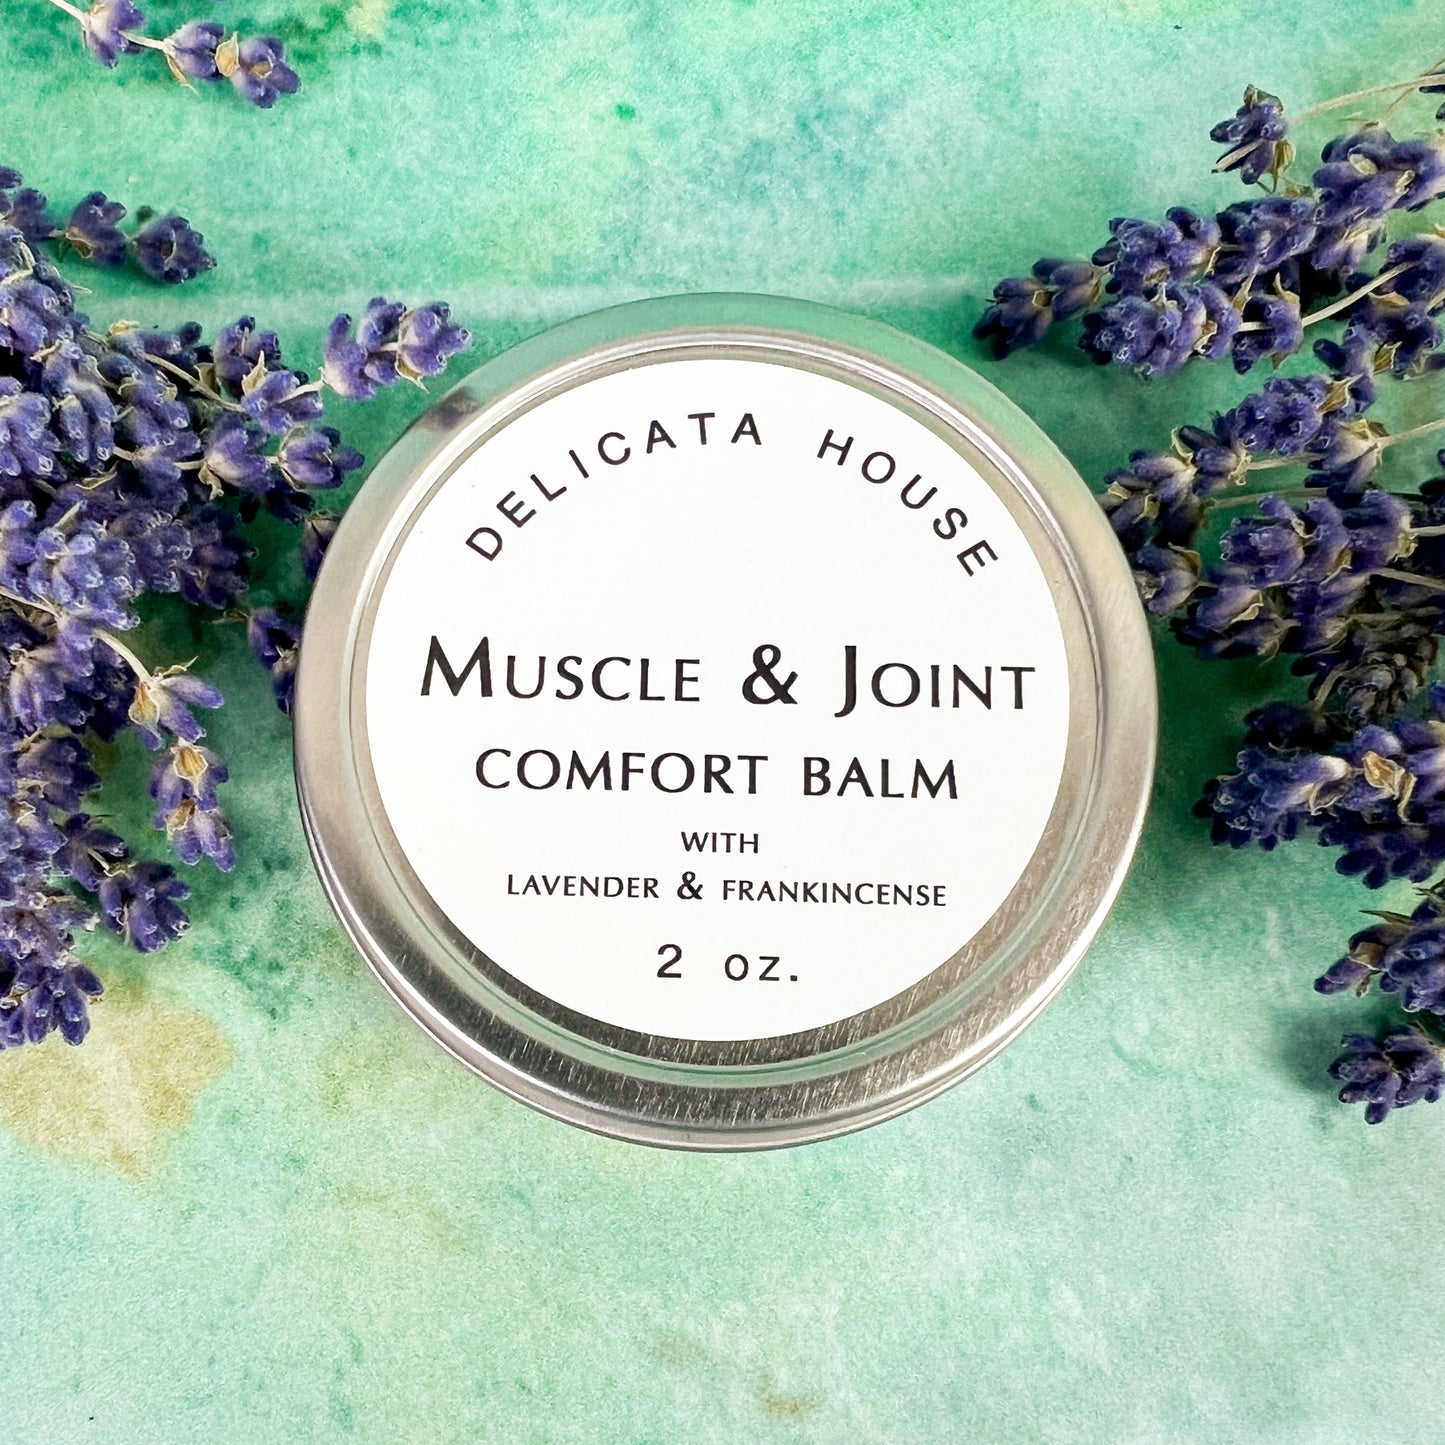 Muscle & Joint Comfort Balm 2oz. - Muscle Rub - Pain Relief Balm - Sore Muscle Rub - Joint Balm